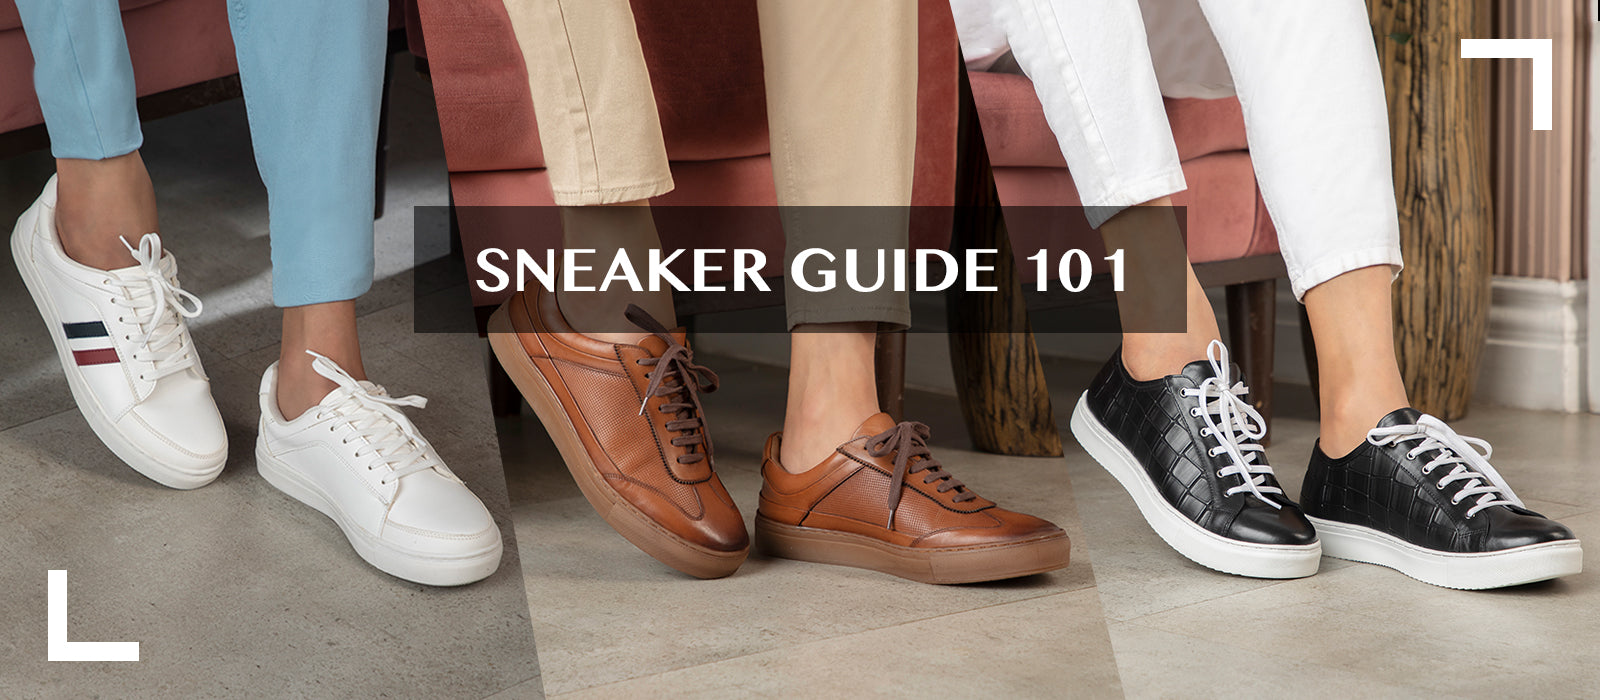 7 Sneaker Style: Art of Pairing Men's Sneakers with Jeans